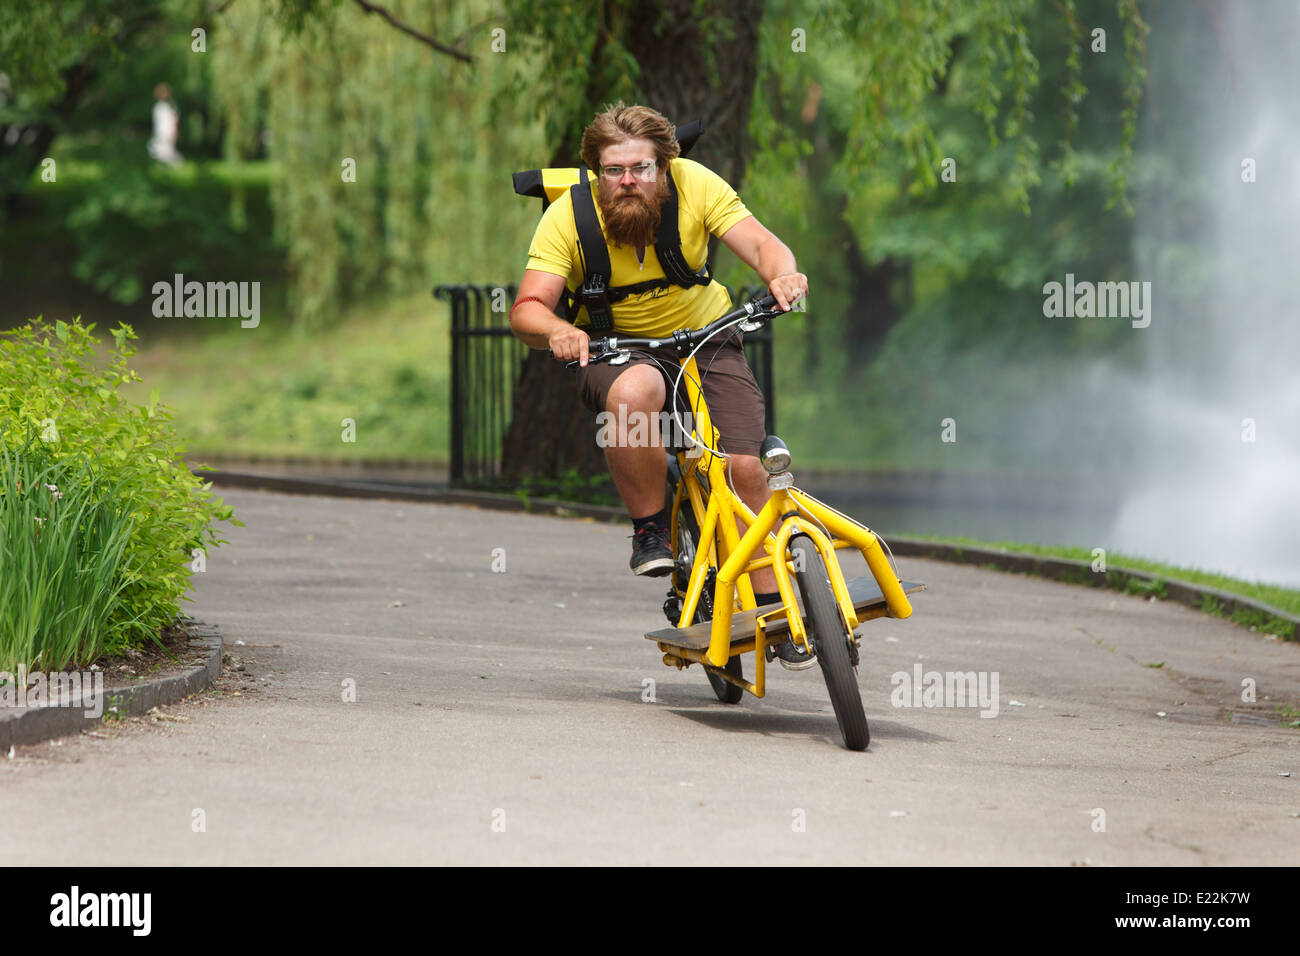 Bicycle messenger with cargo bike speeding for delivery Stock Photo